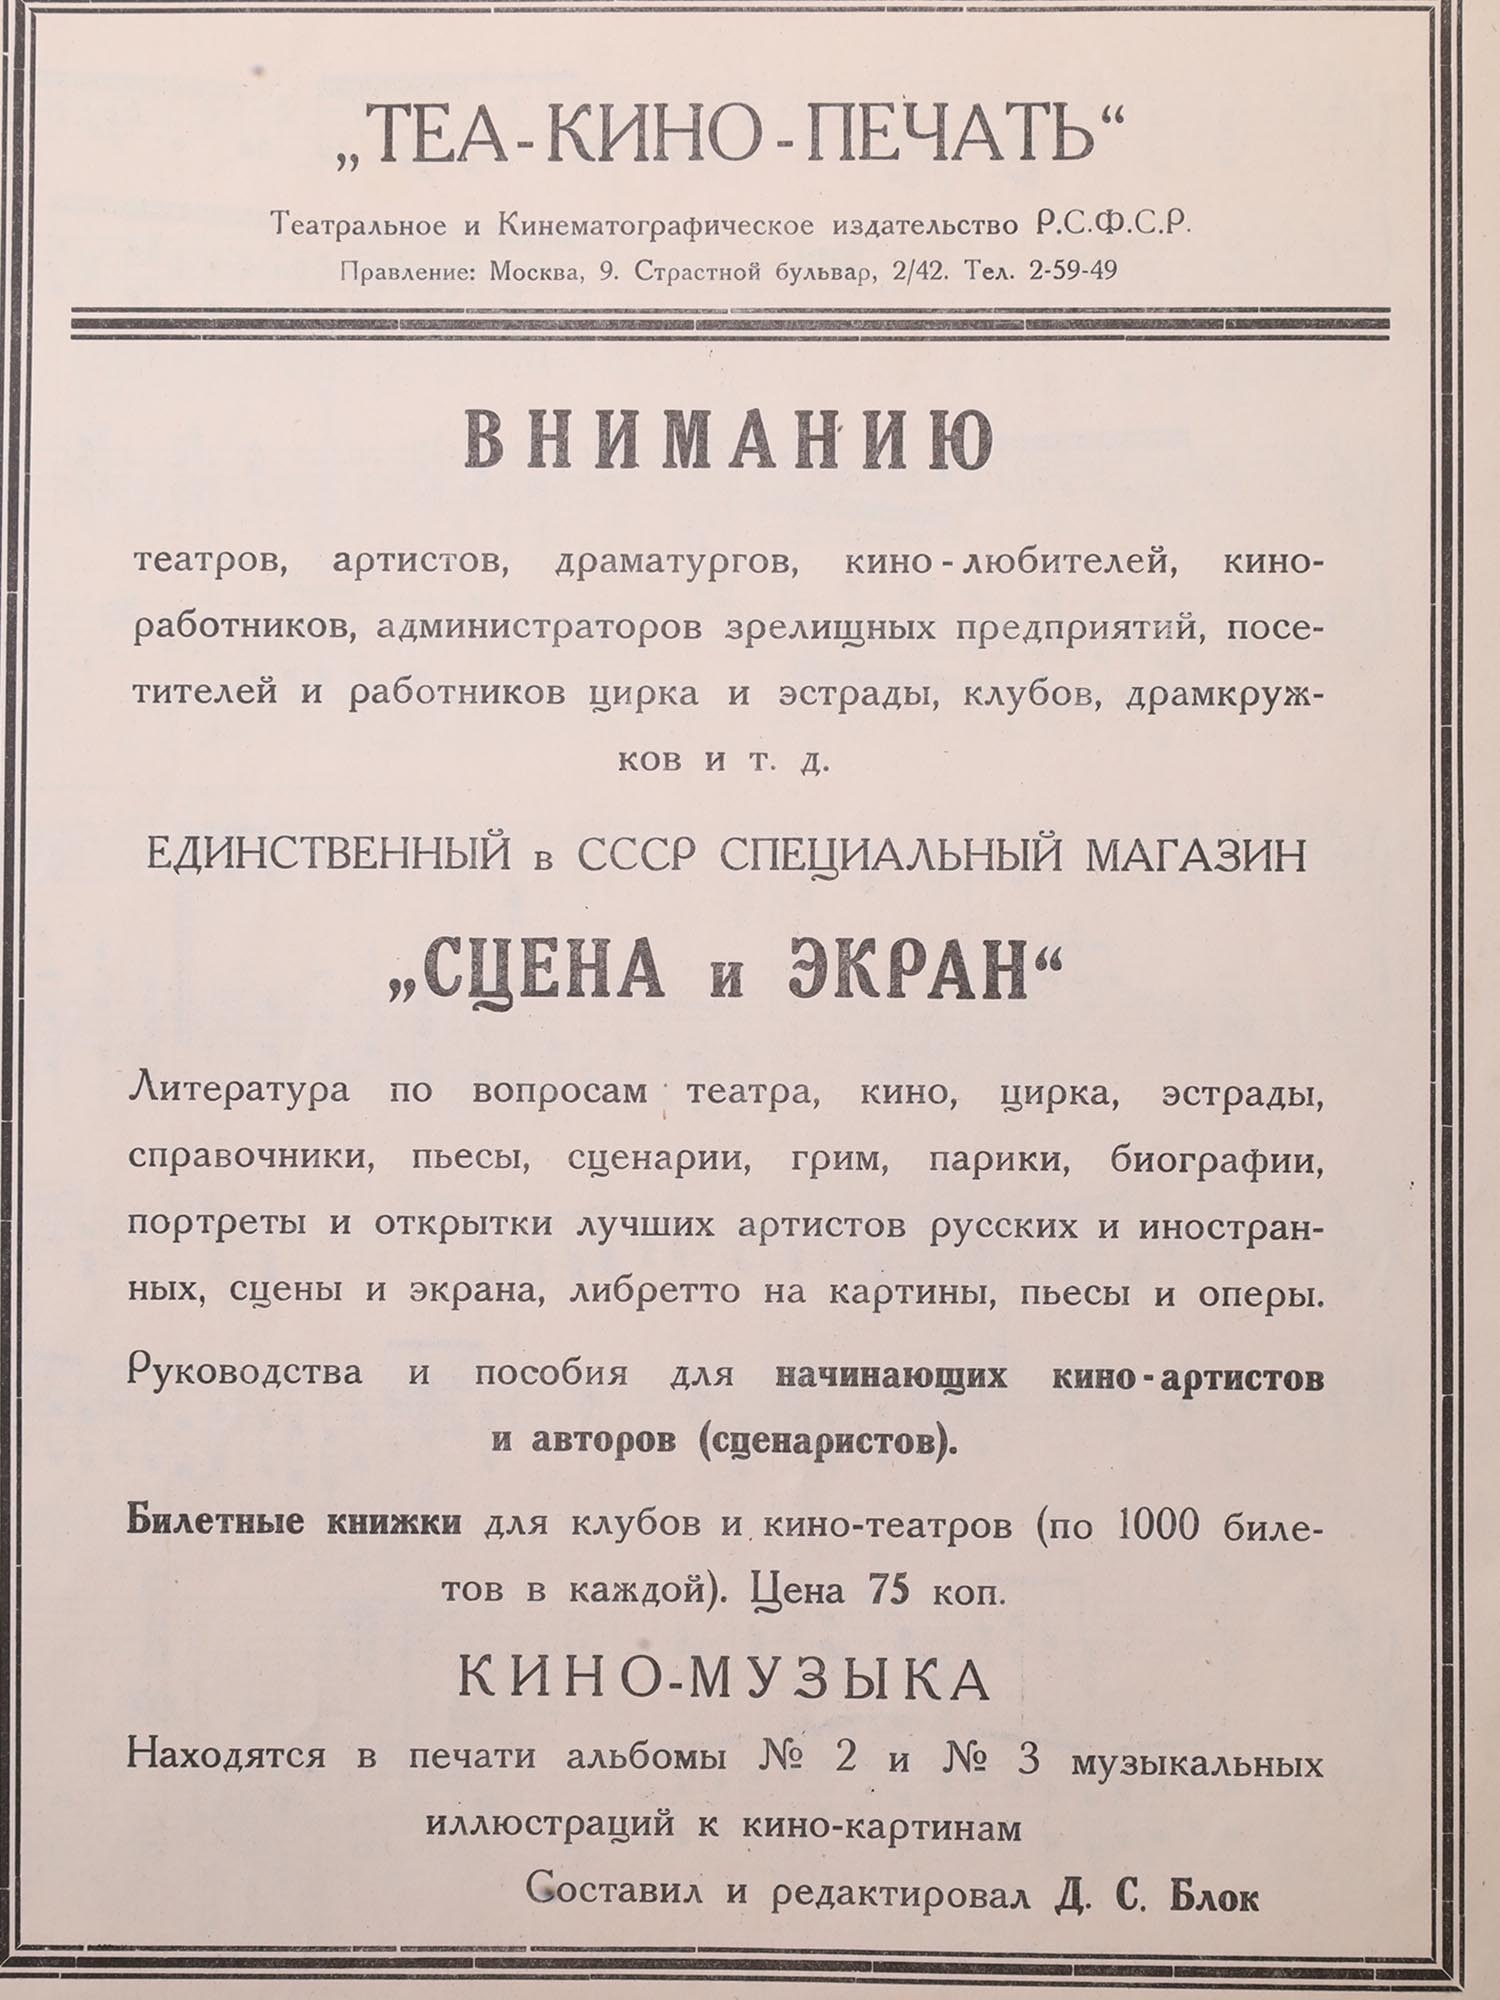 EARLY RUSSIAN SOVIET SHEET MUSIC BOOKS, 1928 PIC-4